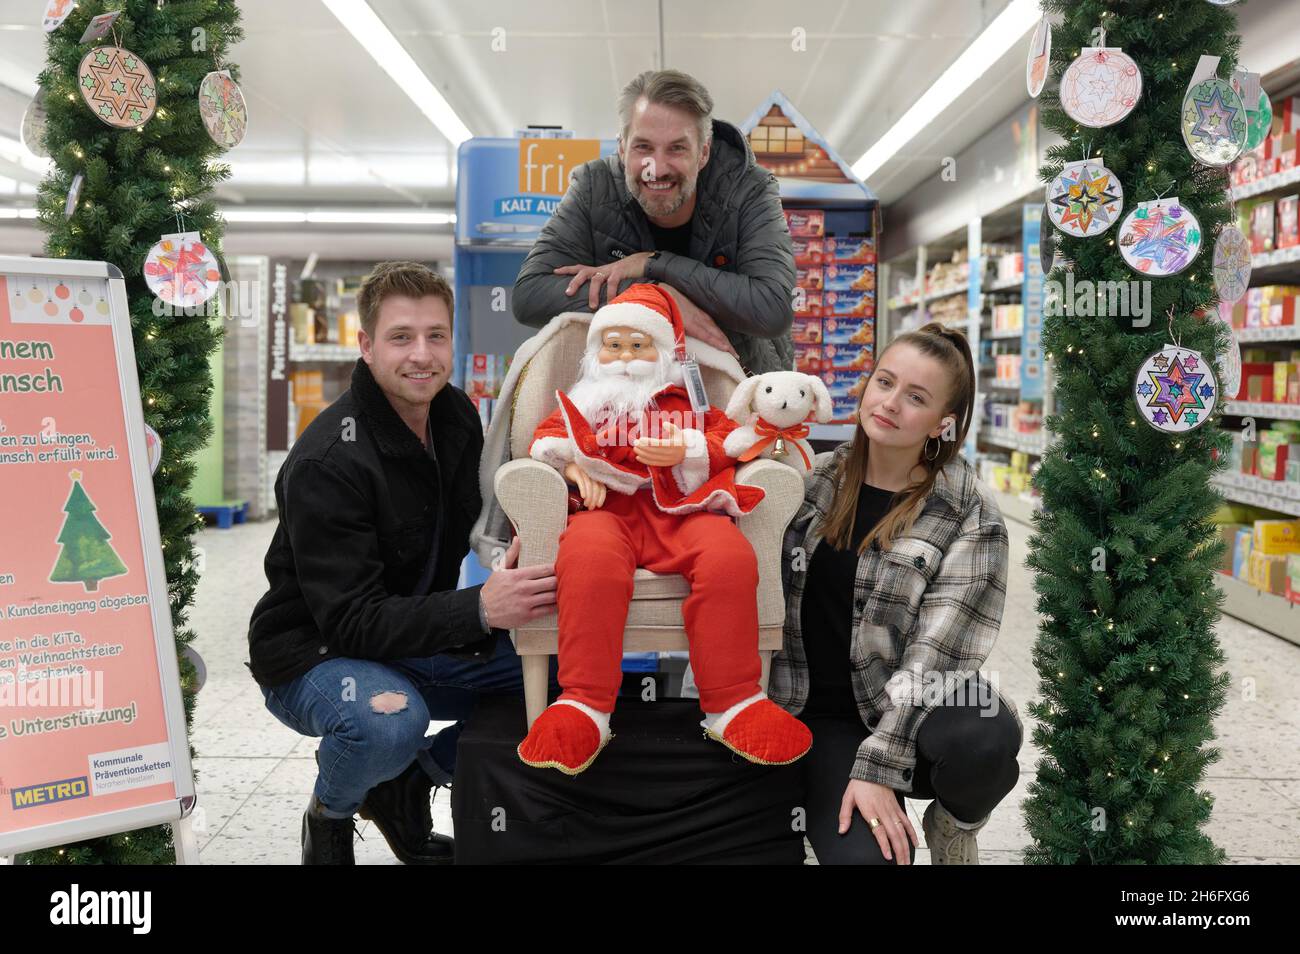 Krefeld, Germany. 15th Nov, 2021. Actors Dominik Flade, Stefan Bockelman  and Julia Wiedemann from the RTL series "Alles was zählt" (l-r) pose with a  Christmas mannequin at a press event for the "